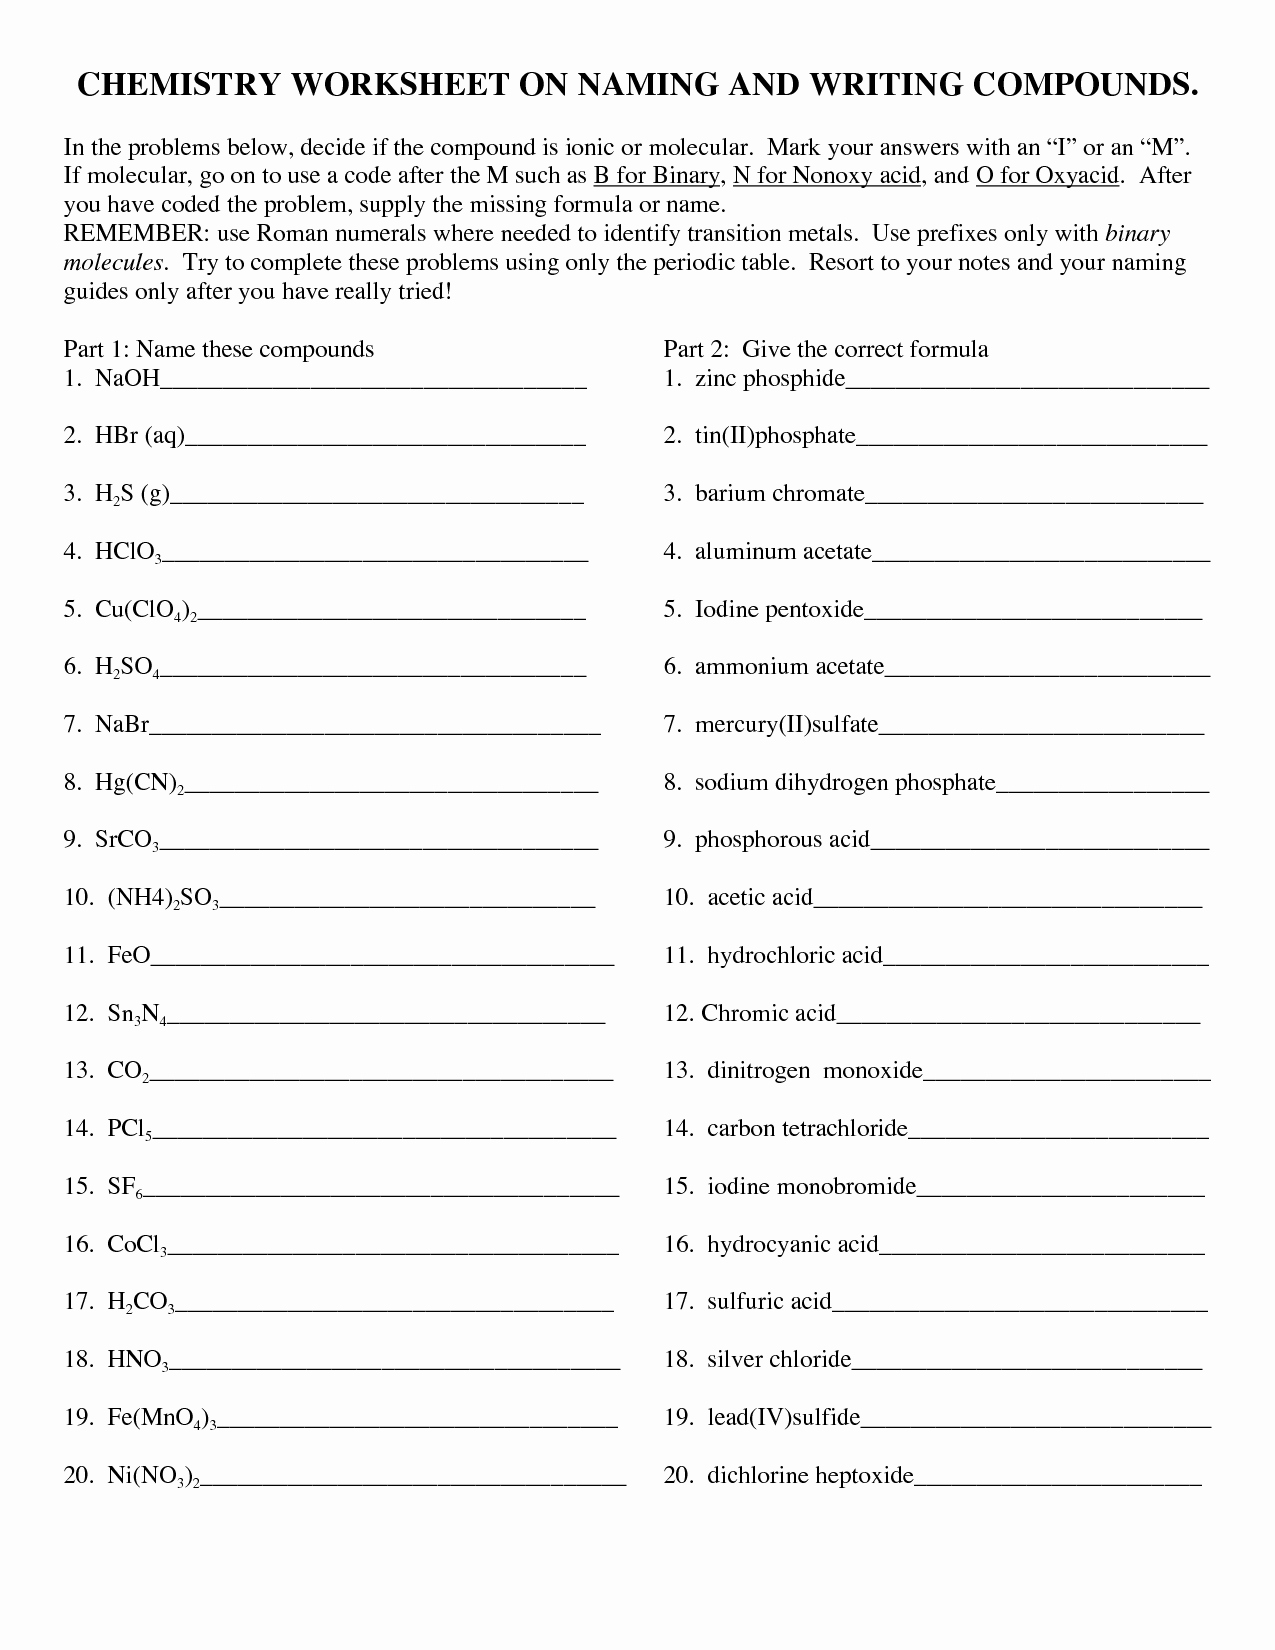 Molecules and Compounds Worksheet Beautiful 9 Best Of Identifying organic Pounds Worksheet